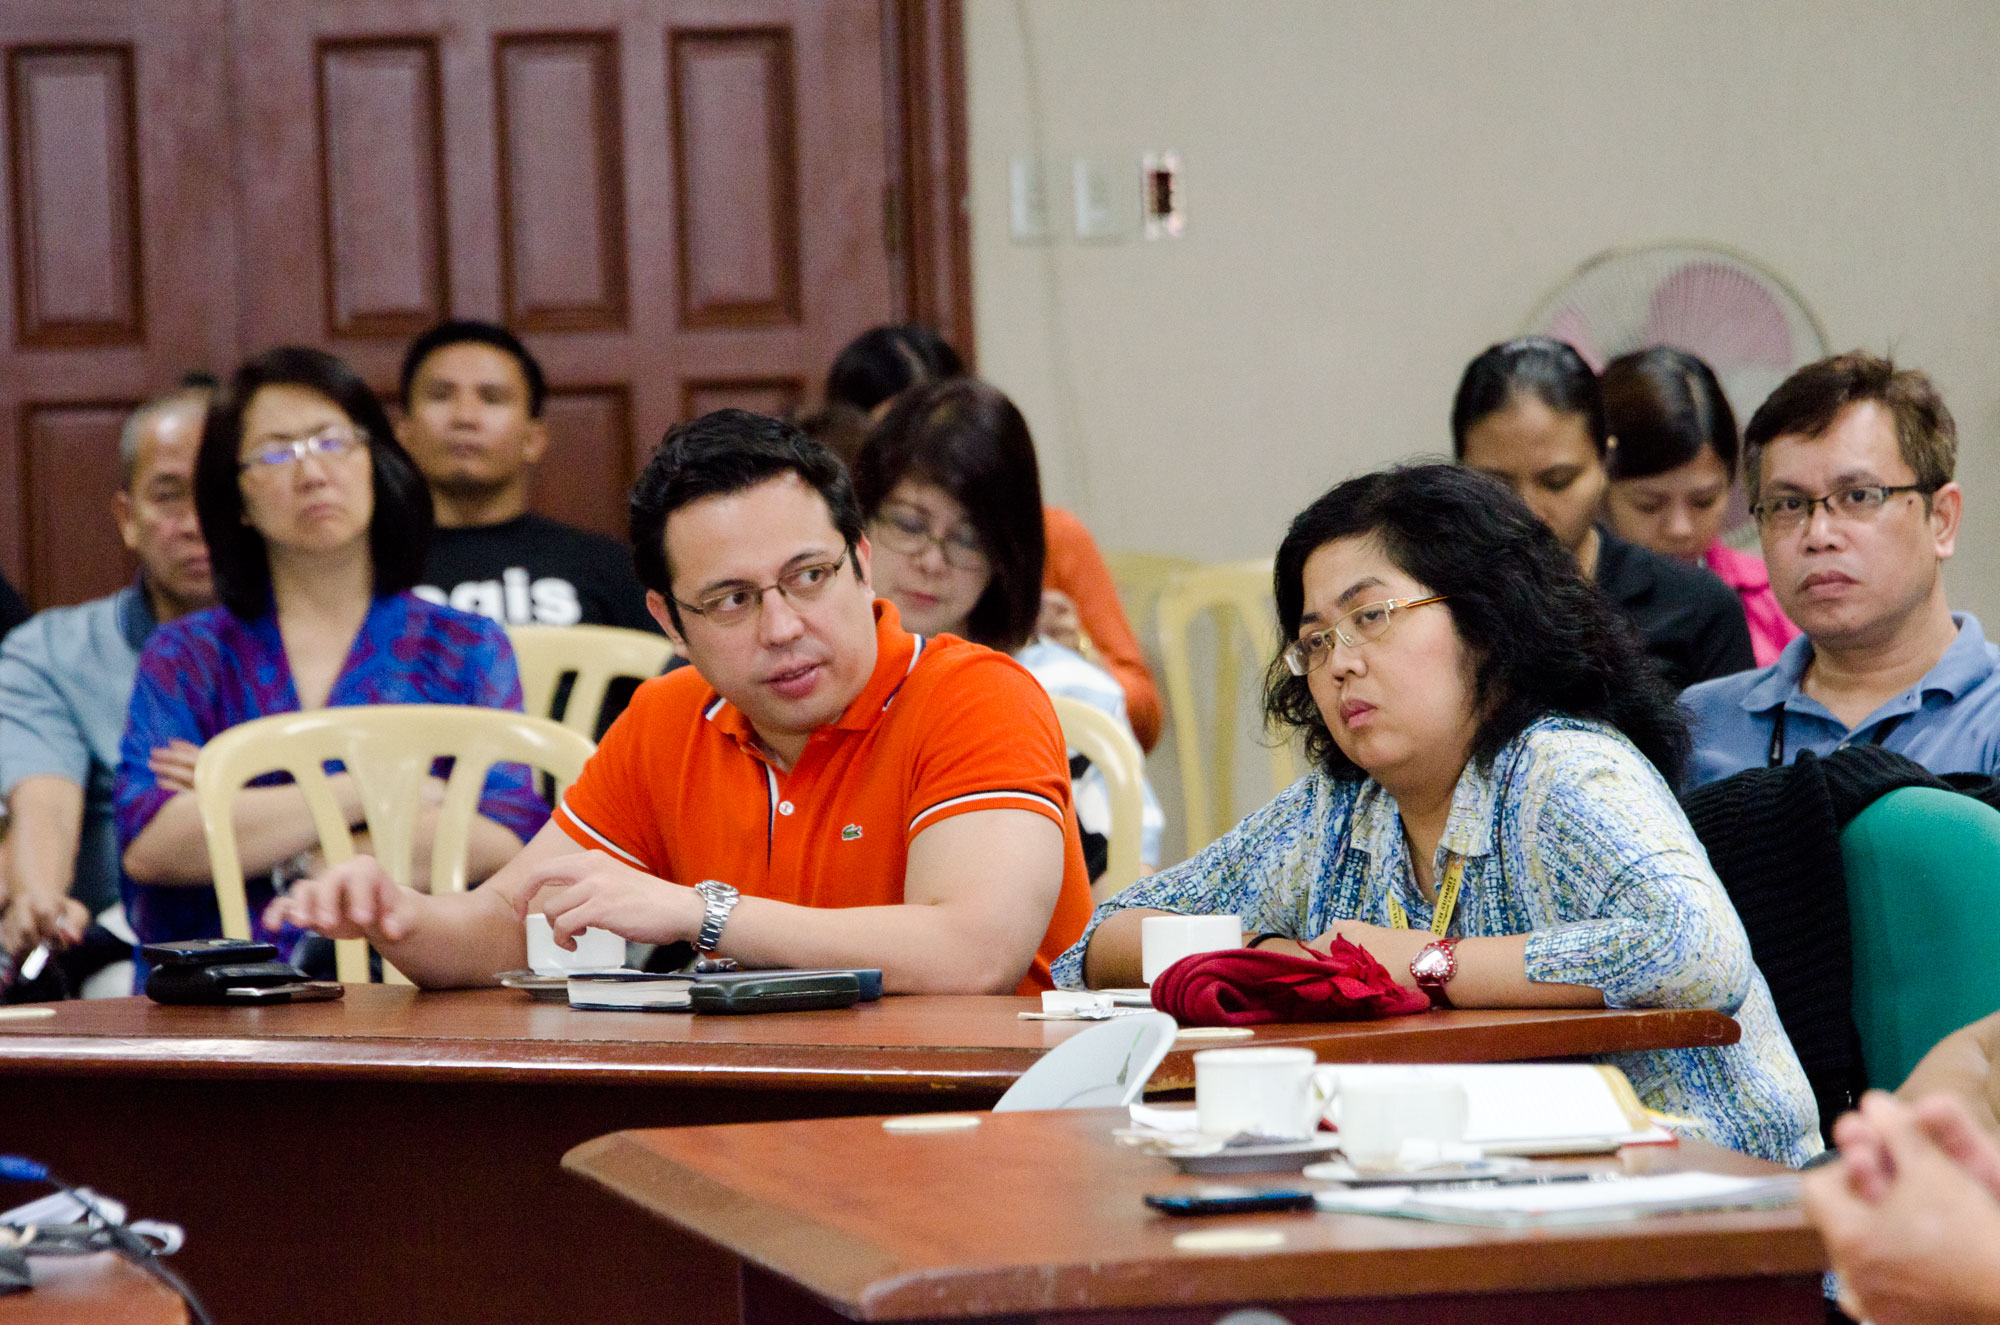 Senate Centennial Lecture Series Assessment Of The Bottom-Up Budgeting Process For FY 2015-GGM_7953.jpg